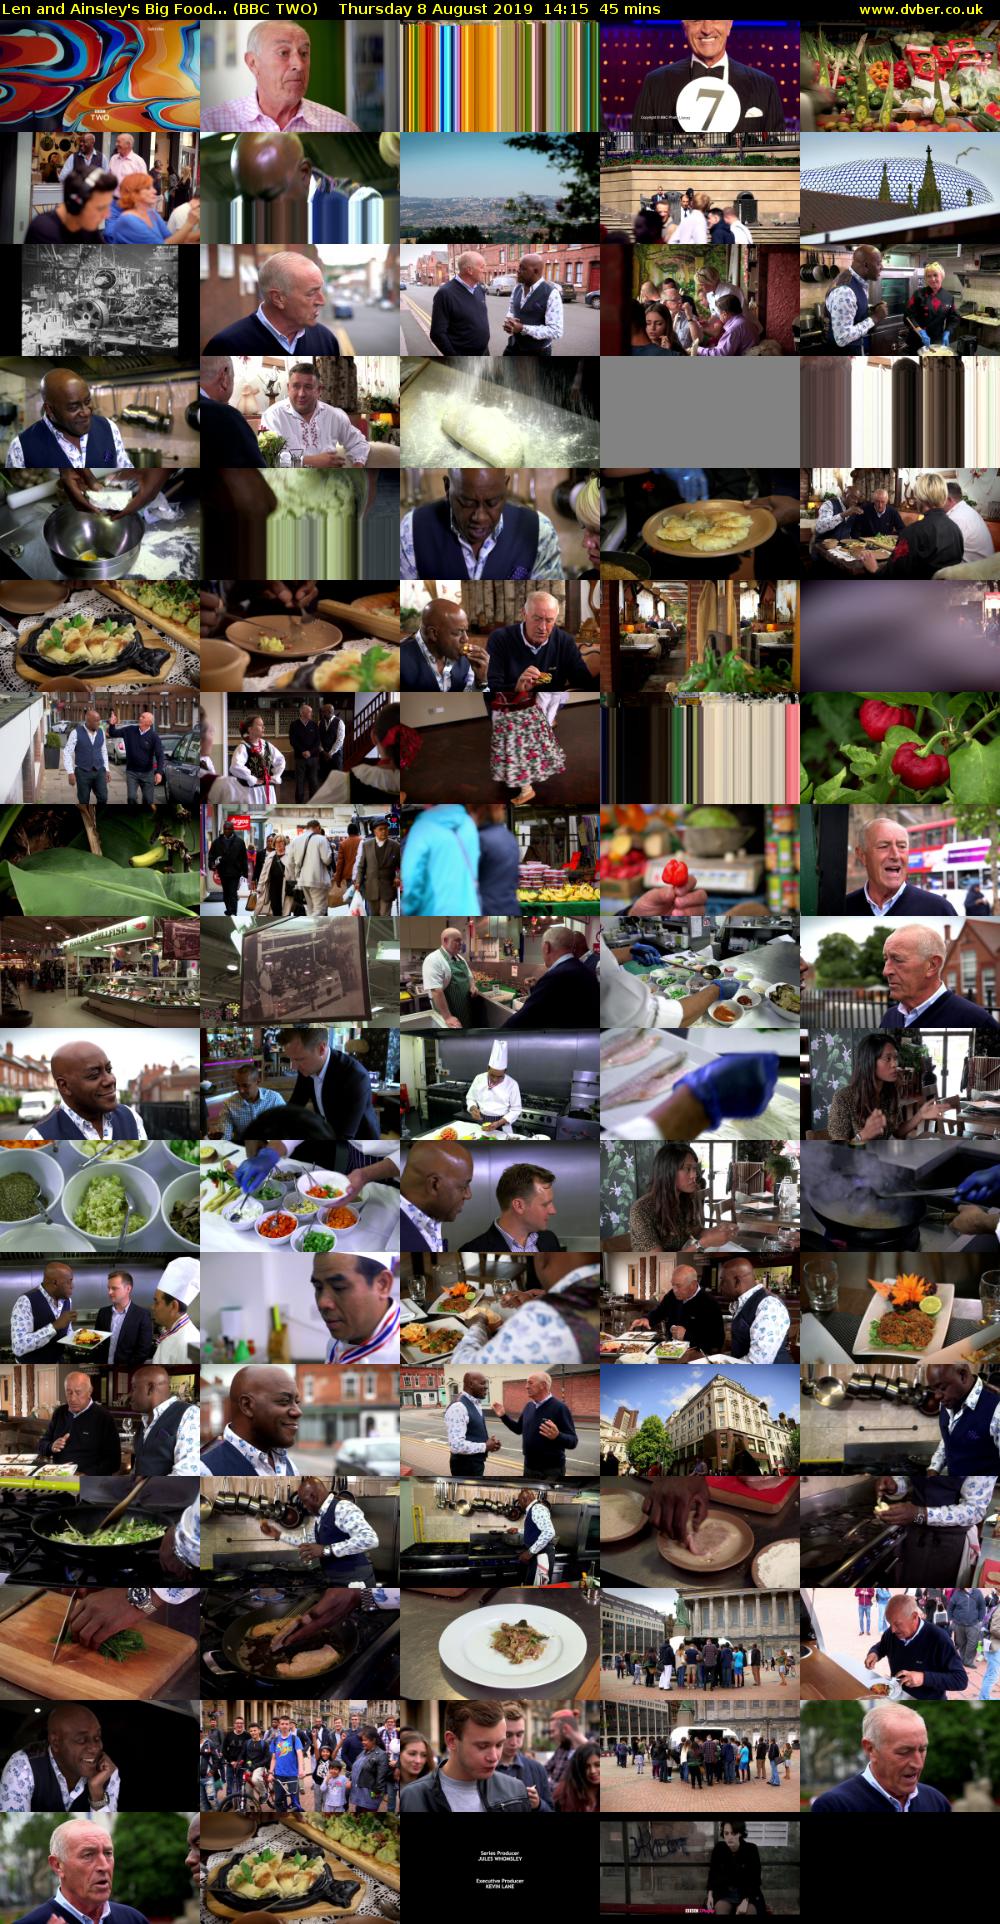 Len and Ainsley's Big Food... (BBC TWO) Thursday 8 August 2019 14:15 - 15:00